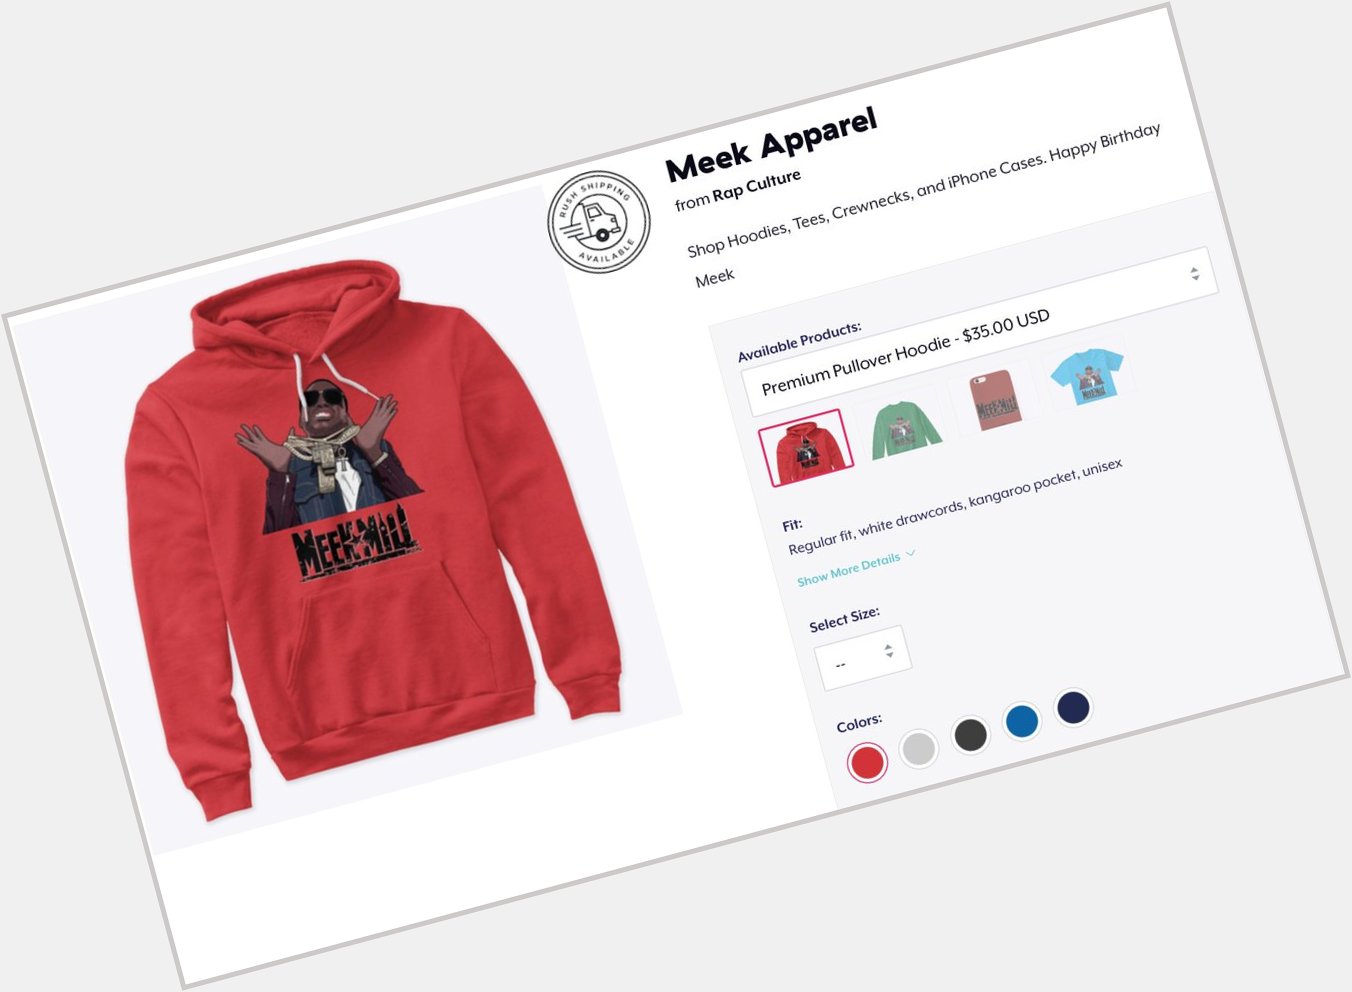 Happy Birthday Meek Mill! Apparel just dropped in the shop
 